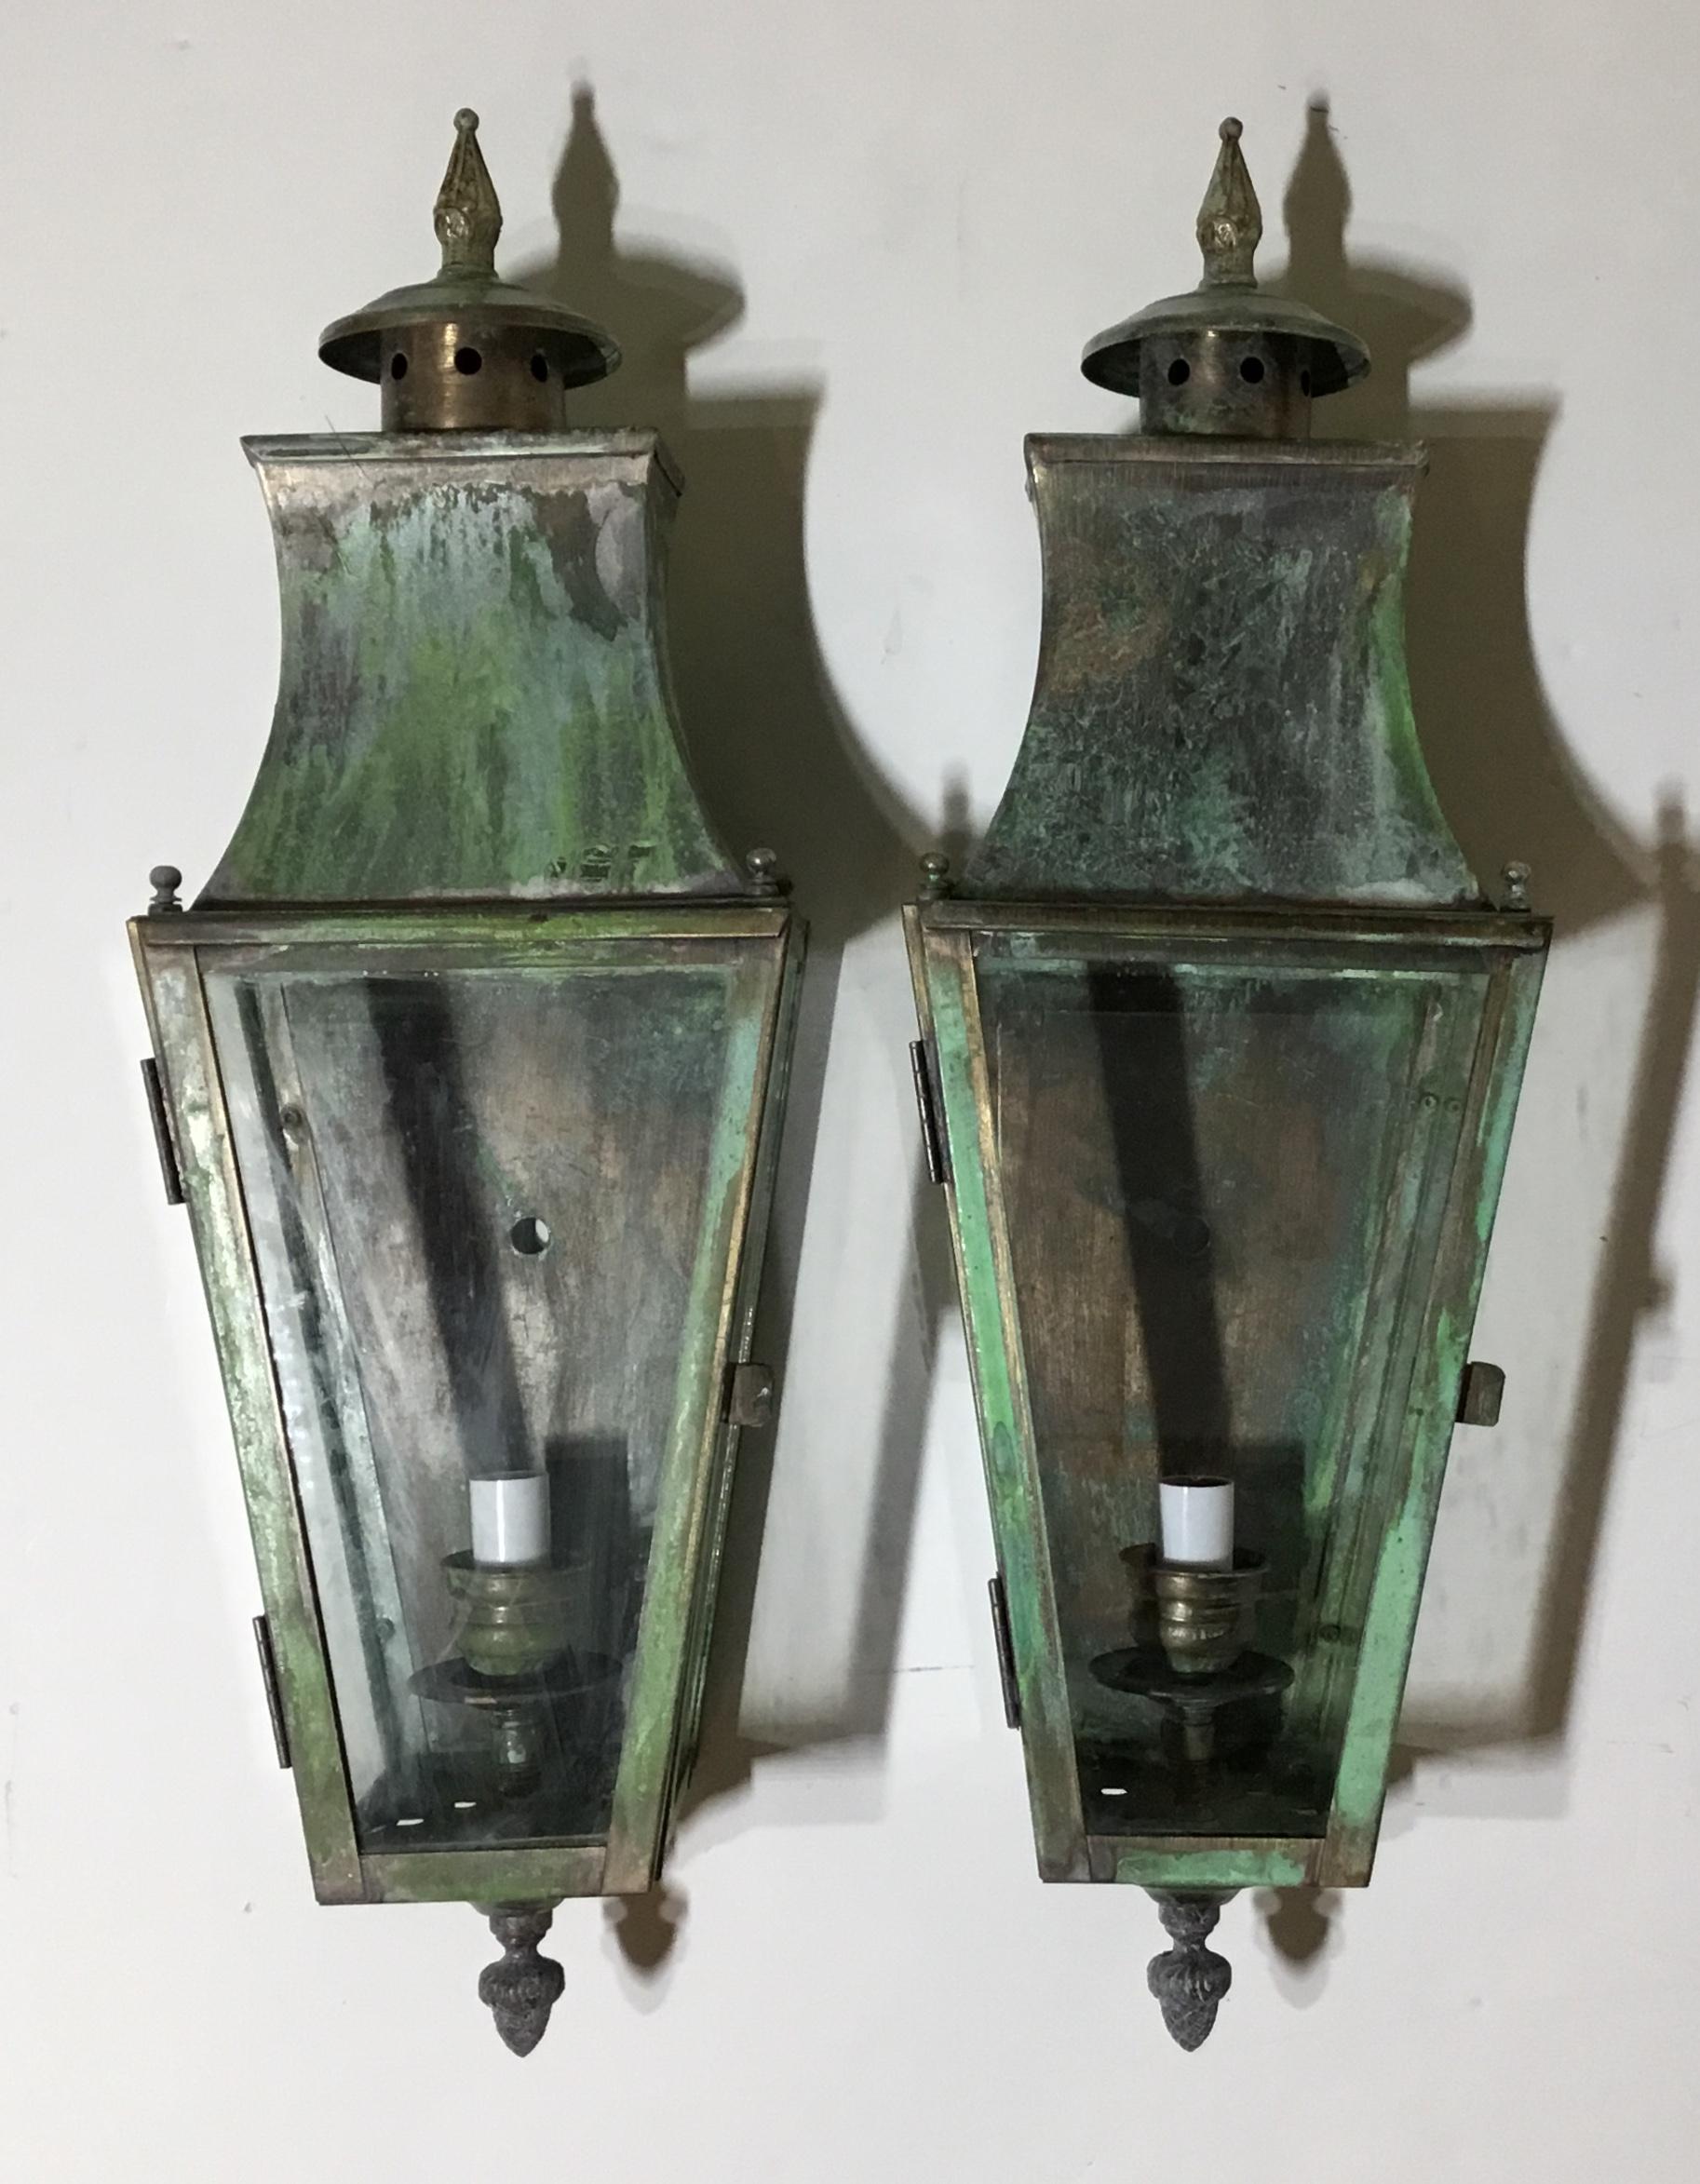 Elegant pair of wall lantern made of solid brass, nice oxidized patina with one 60/watt light each, suitable for wet locations. Electrified and ready to use. Decorative use indoor too as wall sconces.